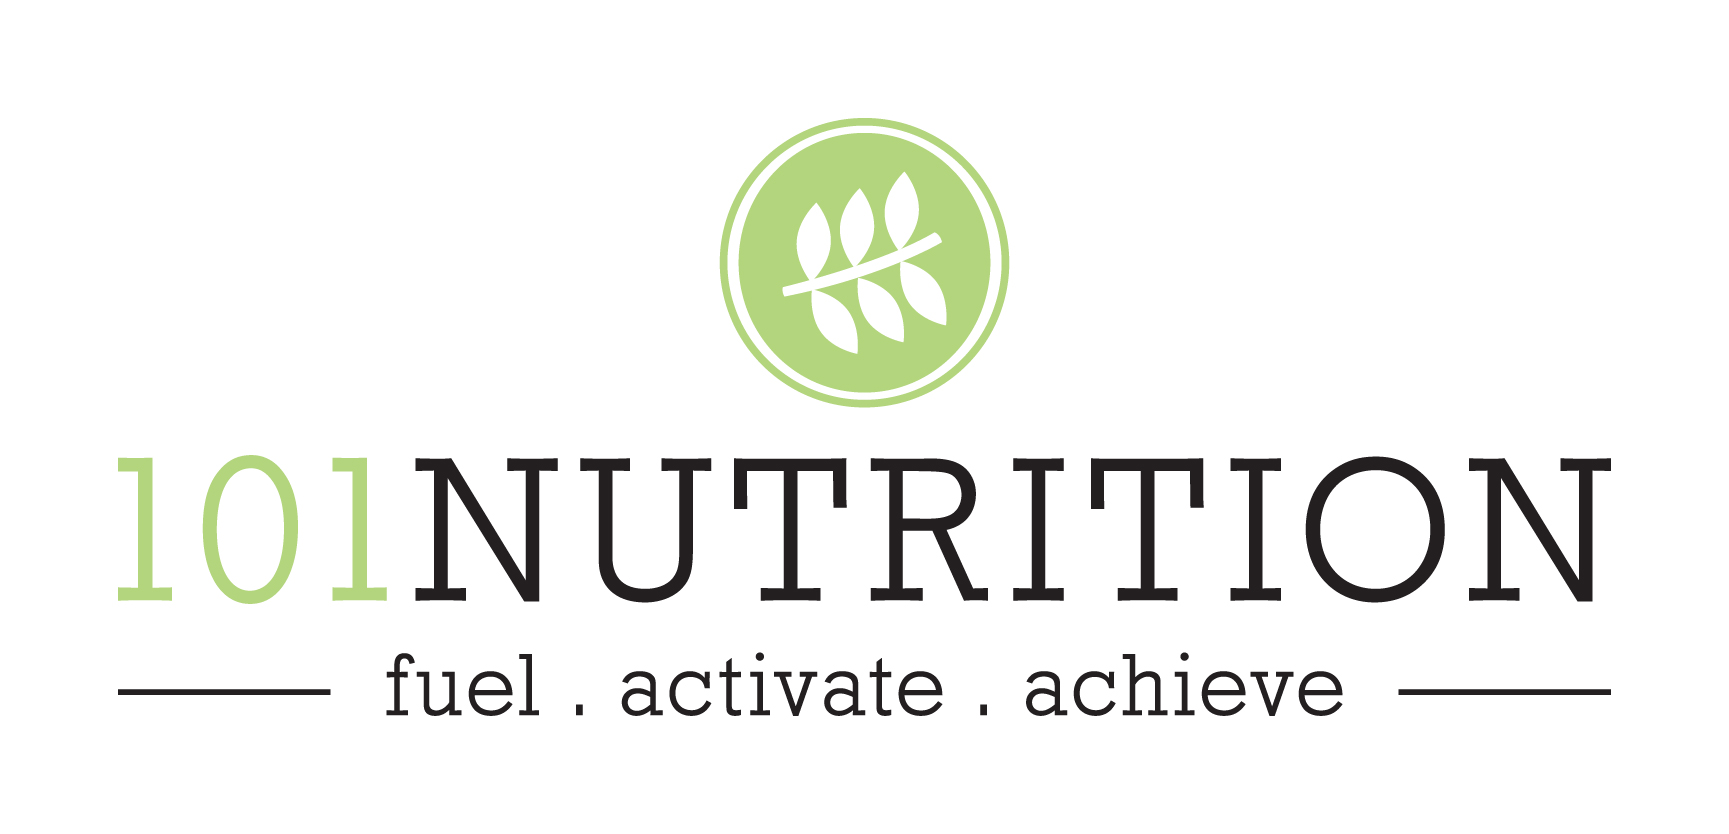 101 Nutrition